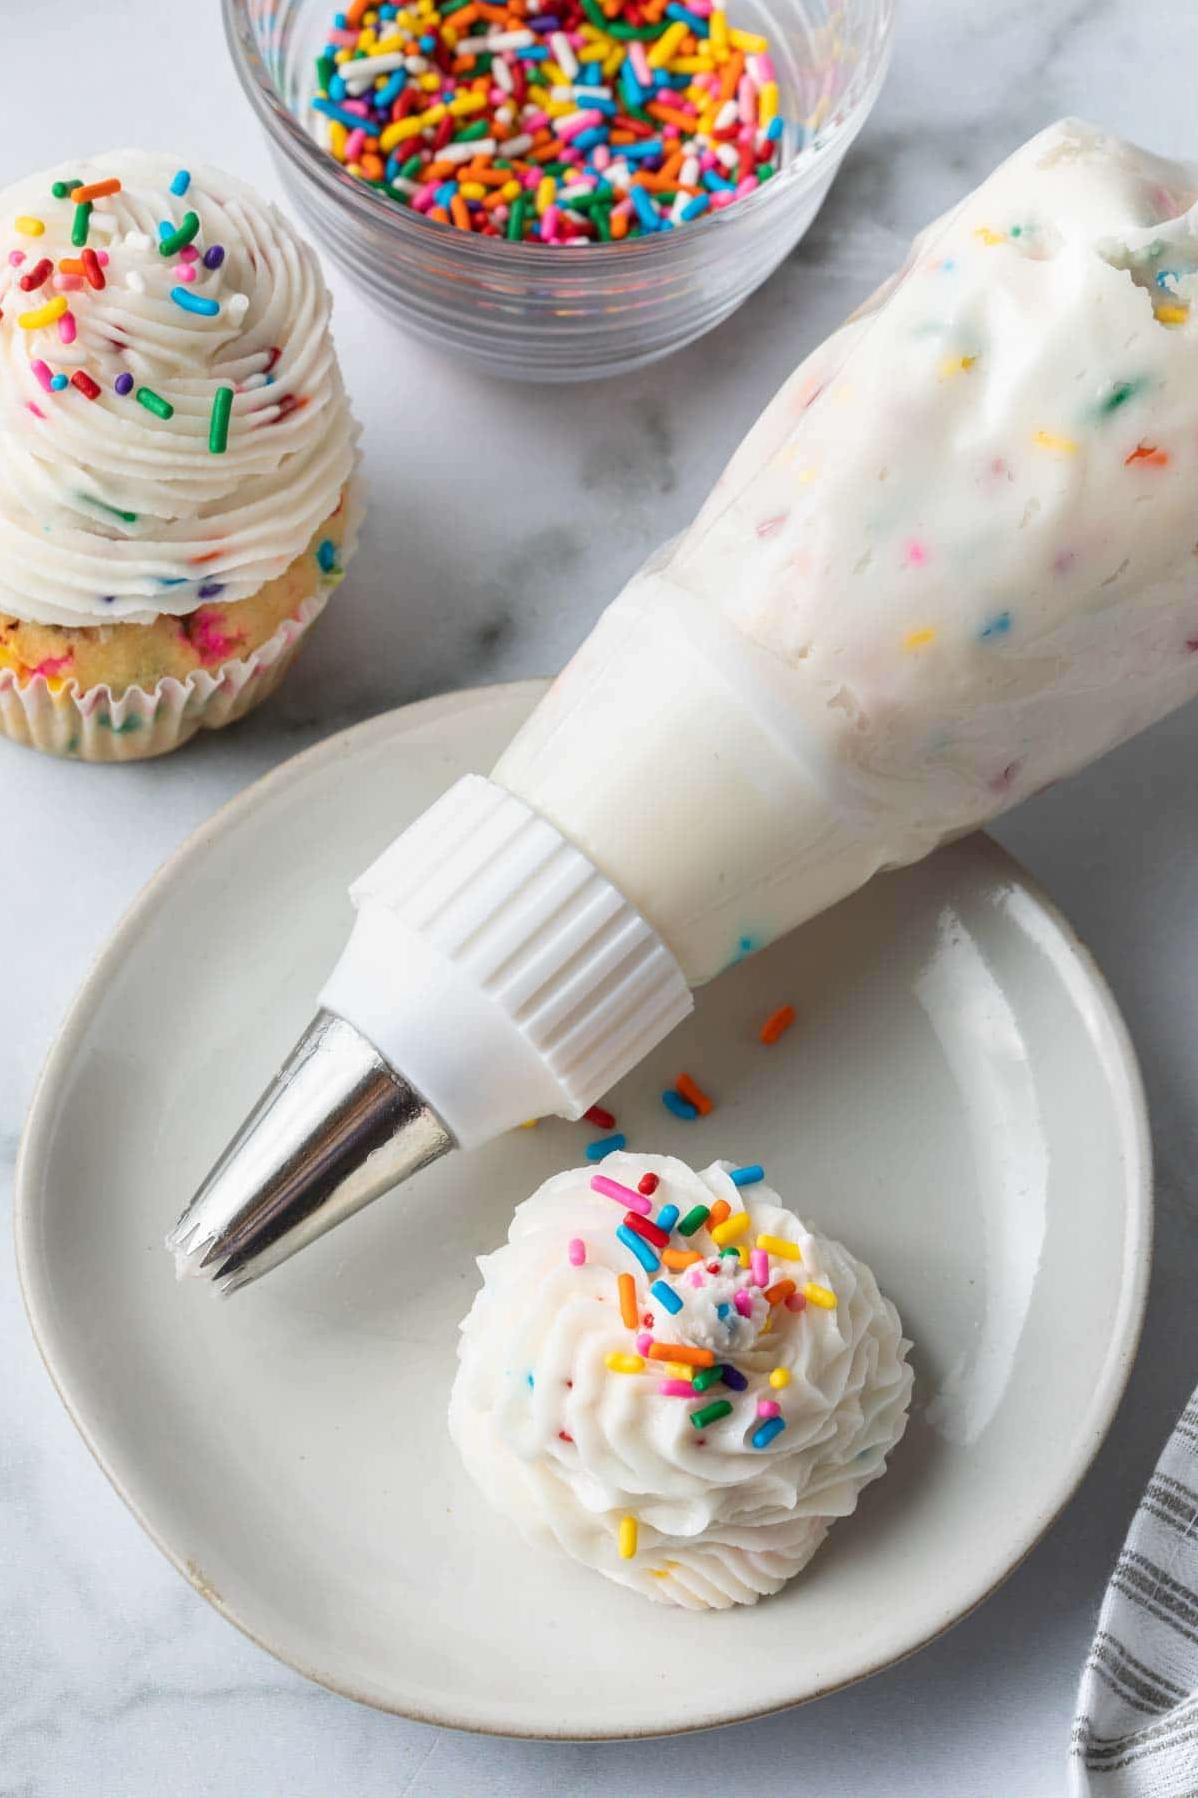  A little frosting never hurt nobody!